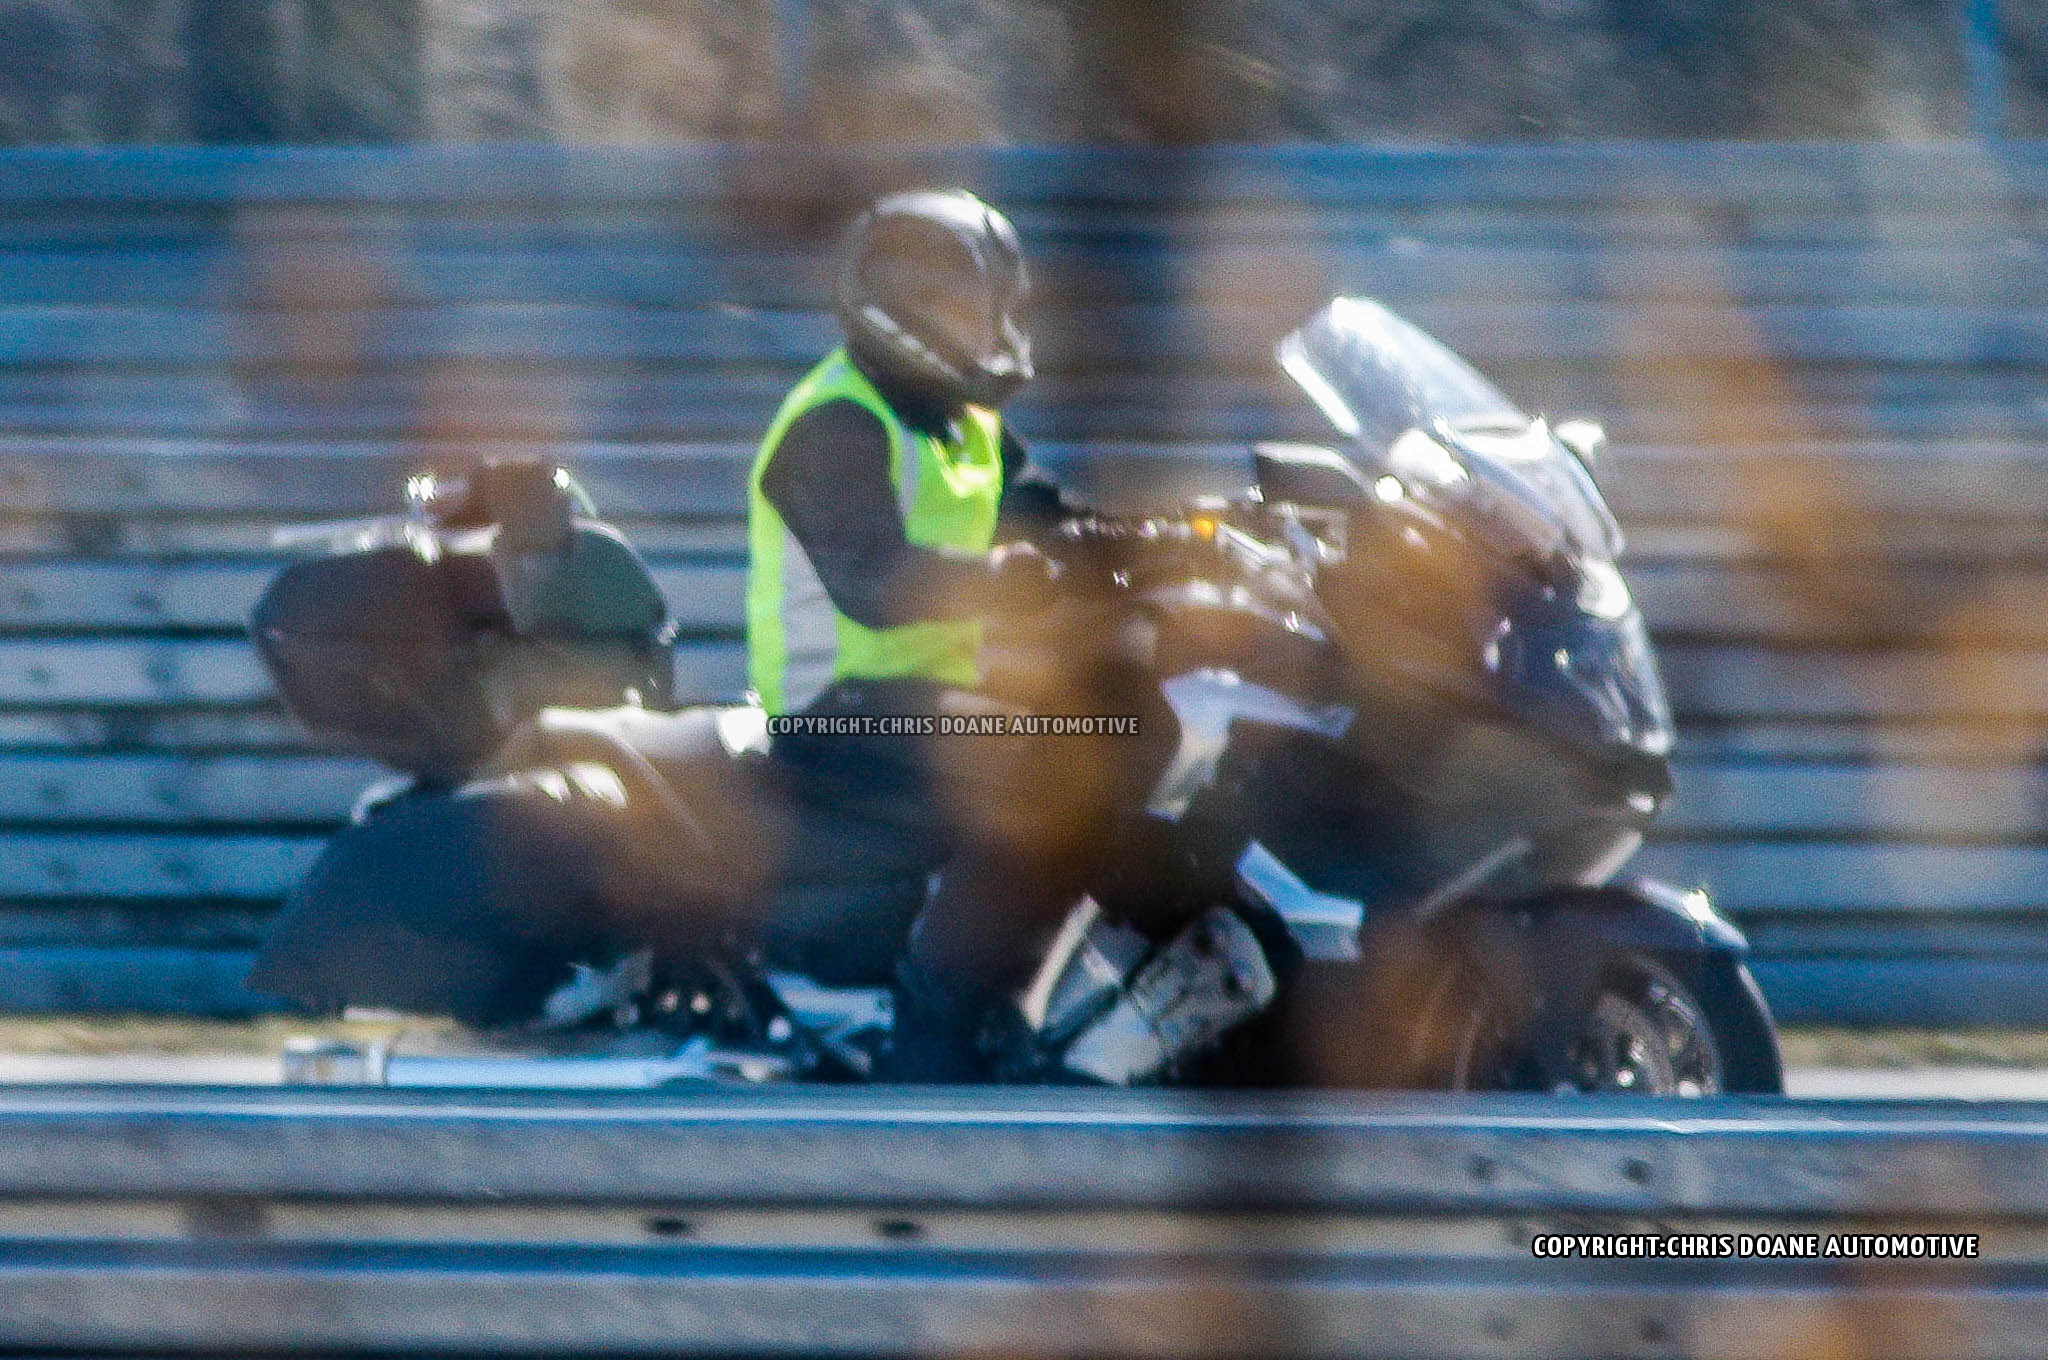 BMW K1600 bagger and liquid-cooled R1200R spied